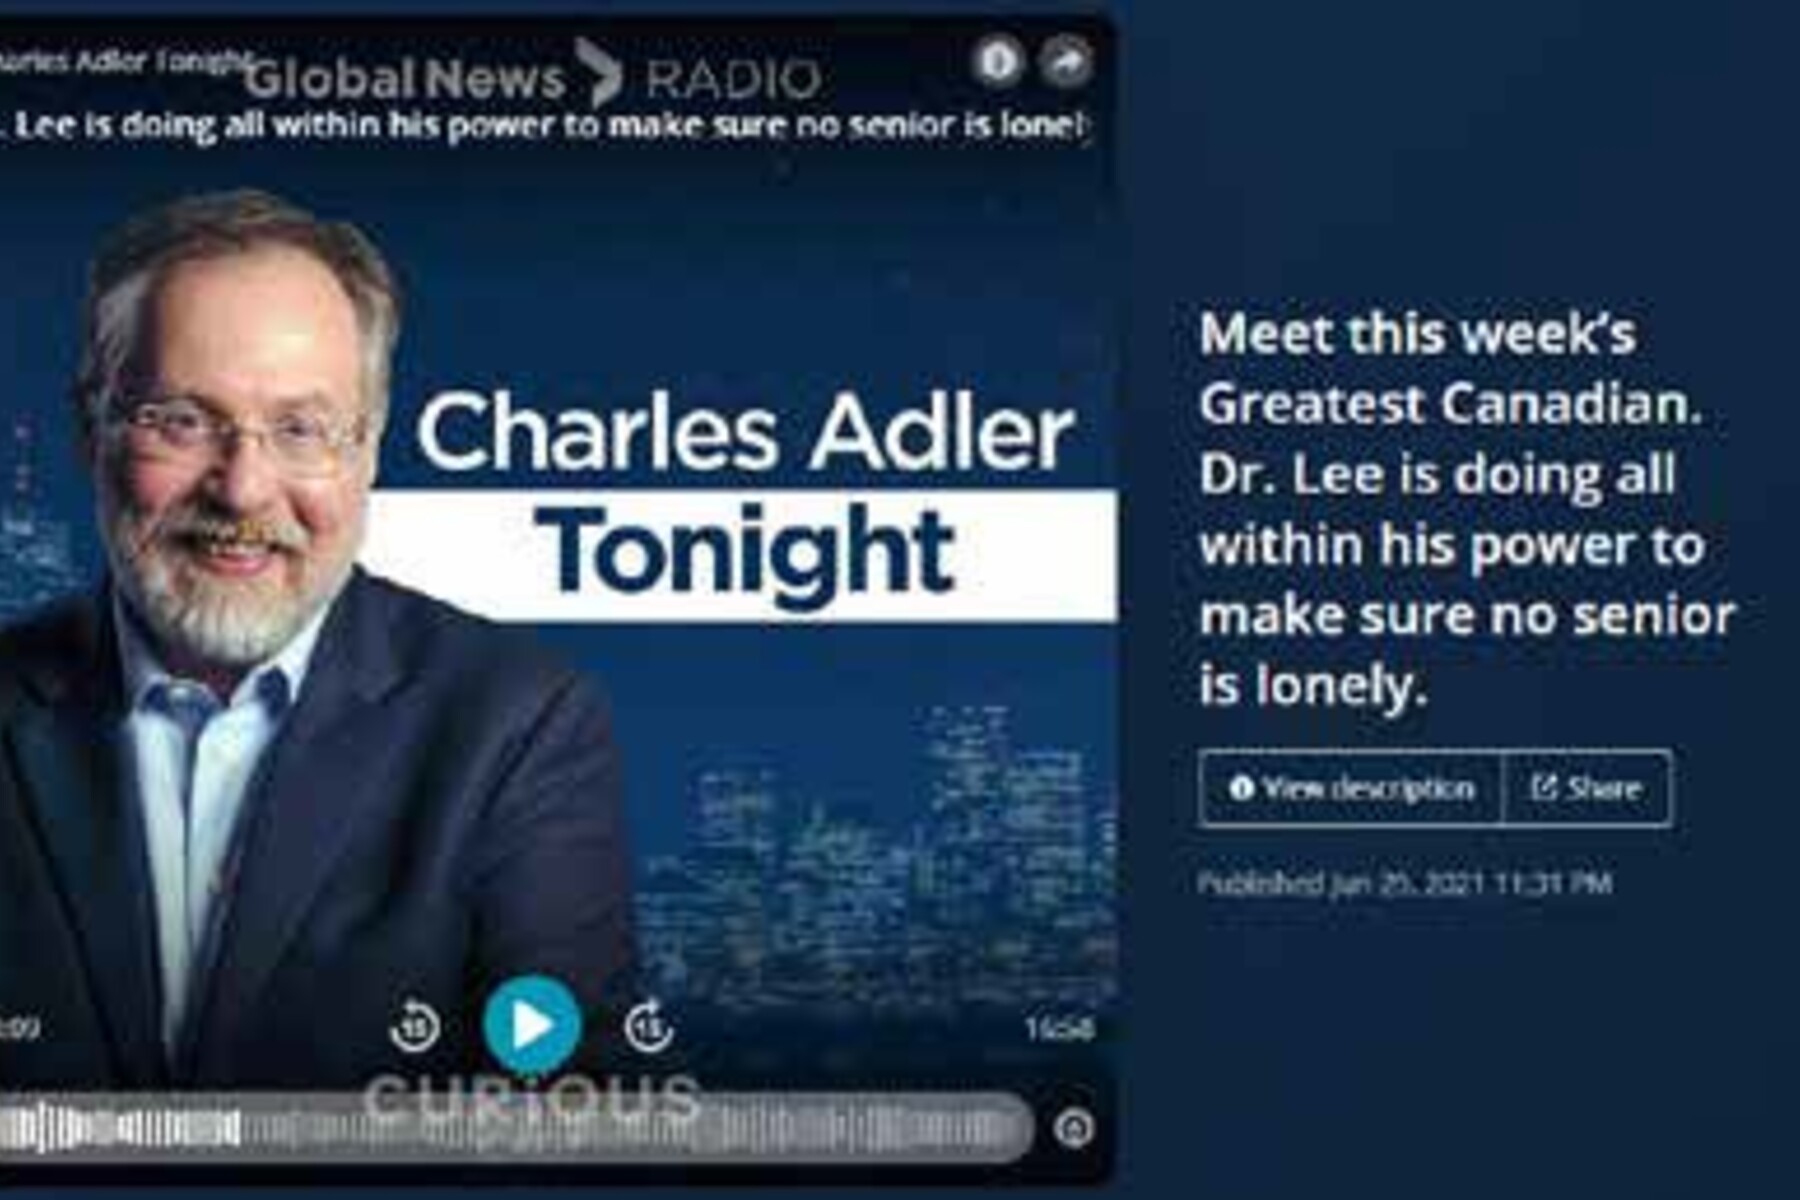 Jacques Lee on Charles Adler tonight screenshot - Meet this week's Greatest Canadian.  Dr. Lee is doing all within his power to make sure no senior is lonely.